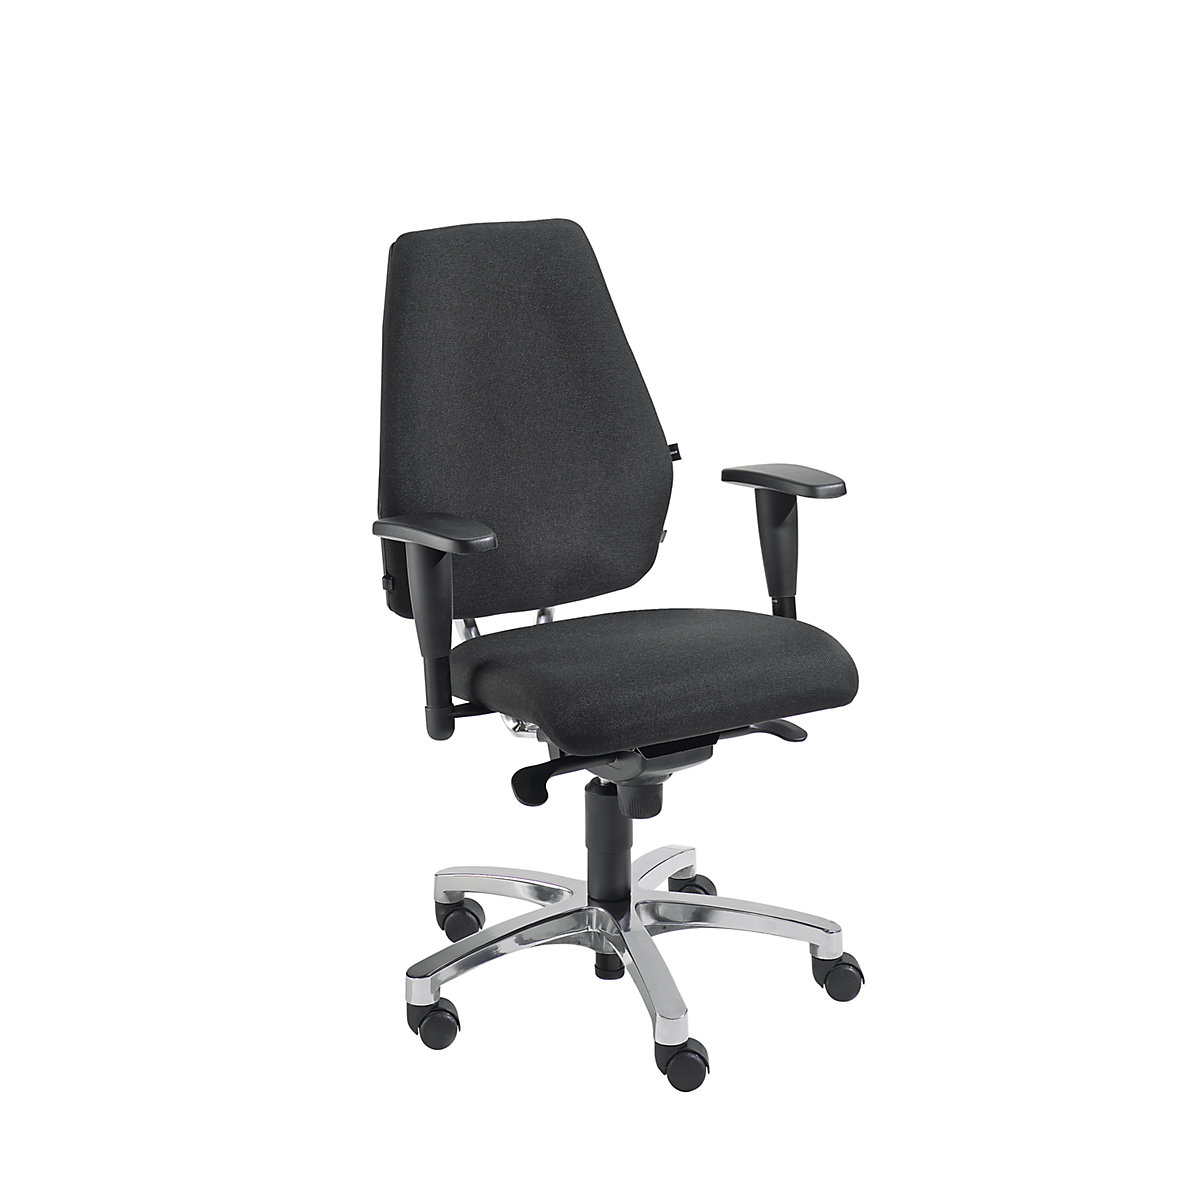 Operator swivel chair, point synchronous mechanism – Topstar